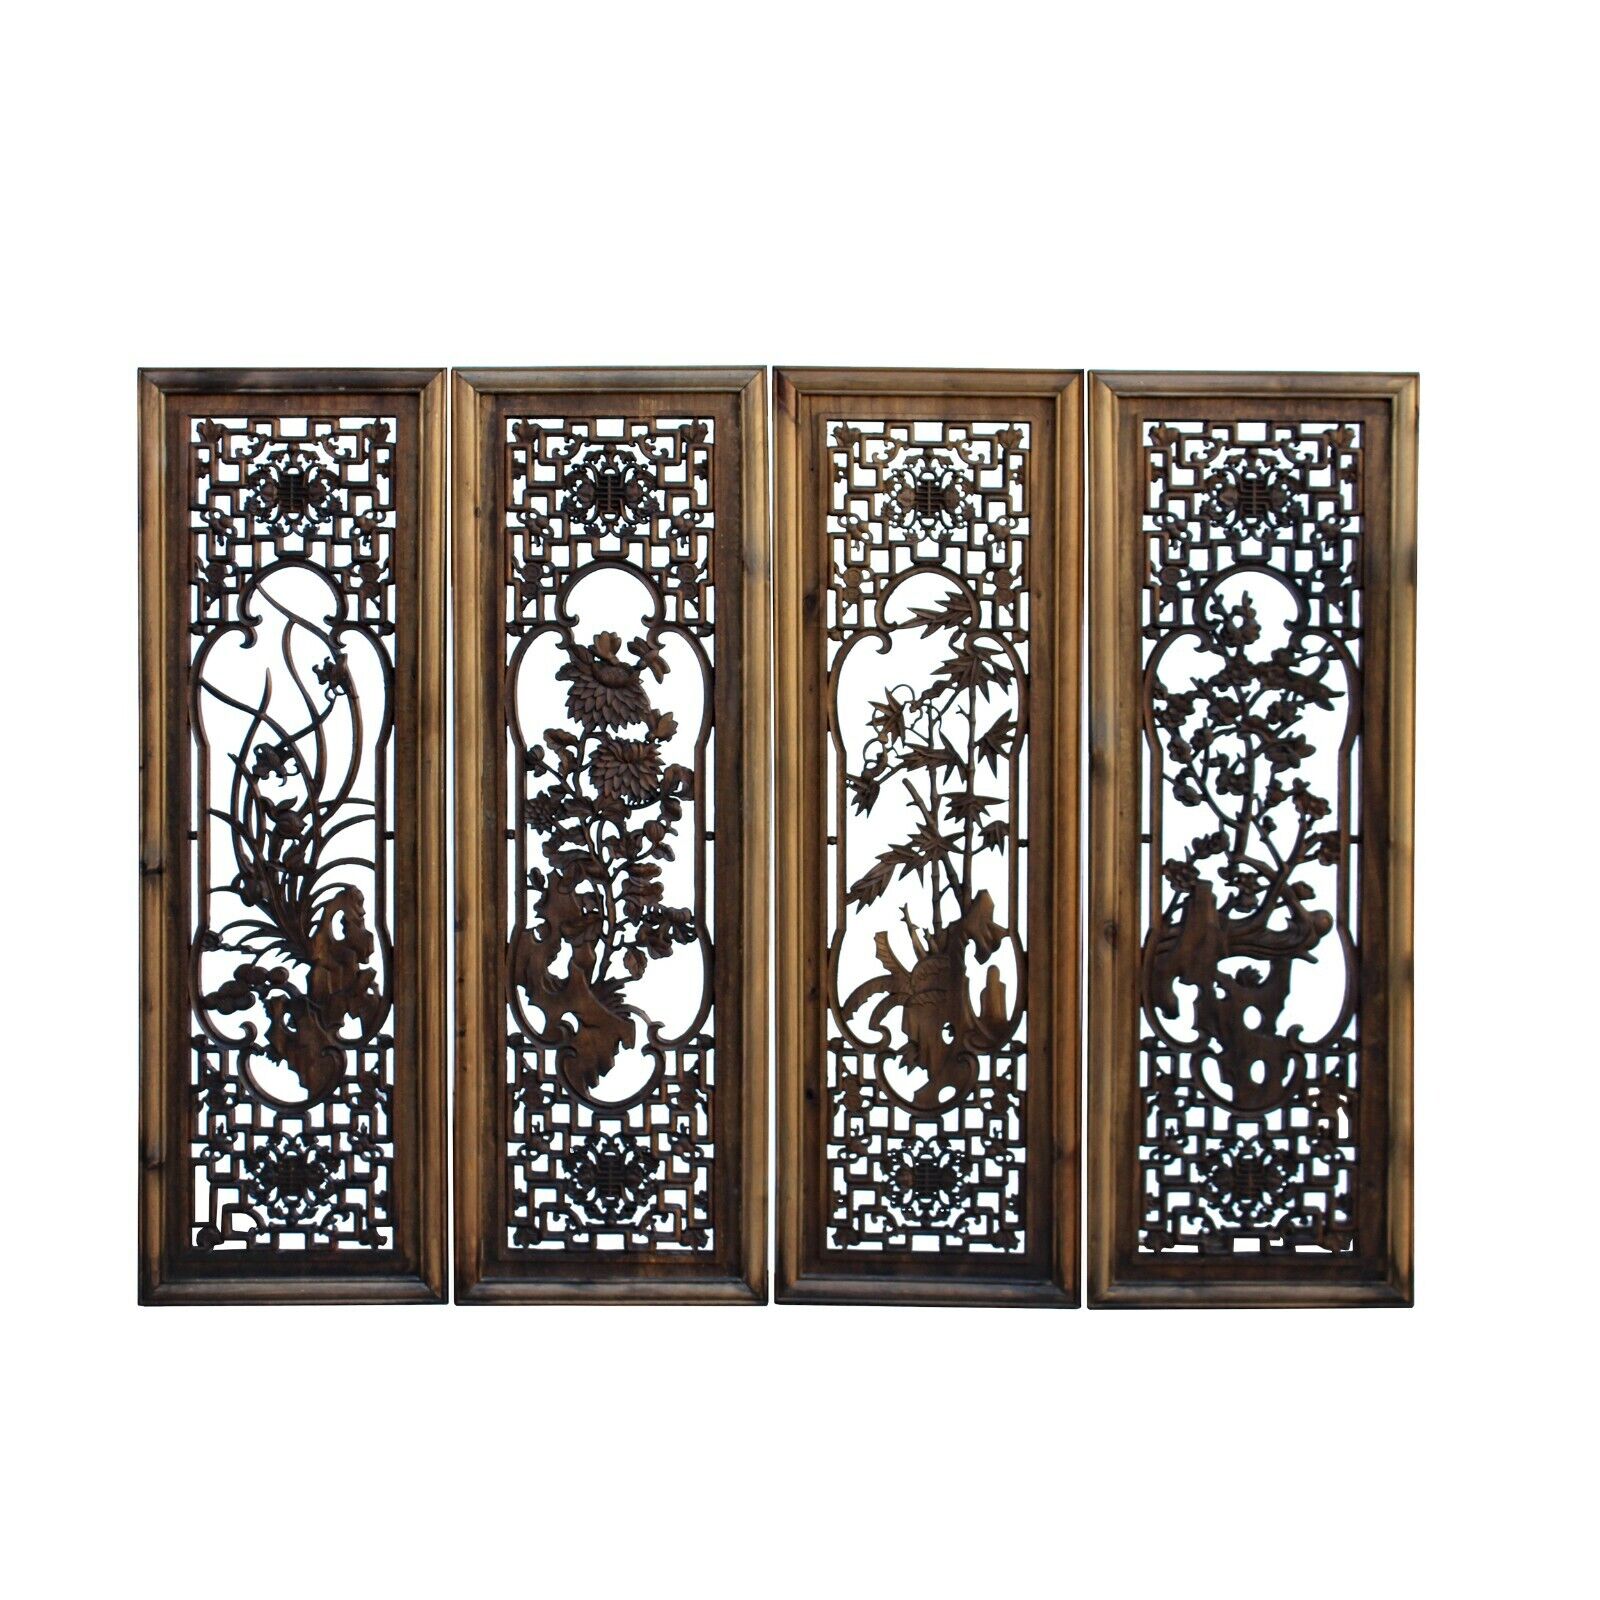 Chinese Set Vintage Distressed 4 Seasons Flower Wooden Wall Plaque Panels cs6042